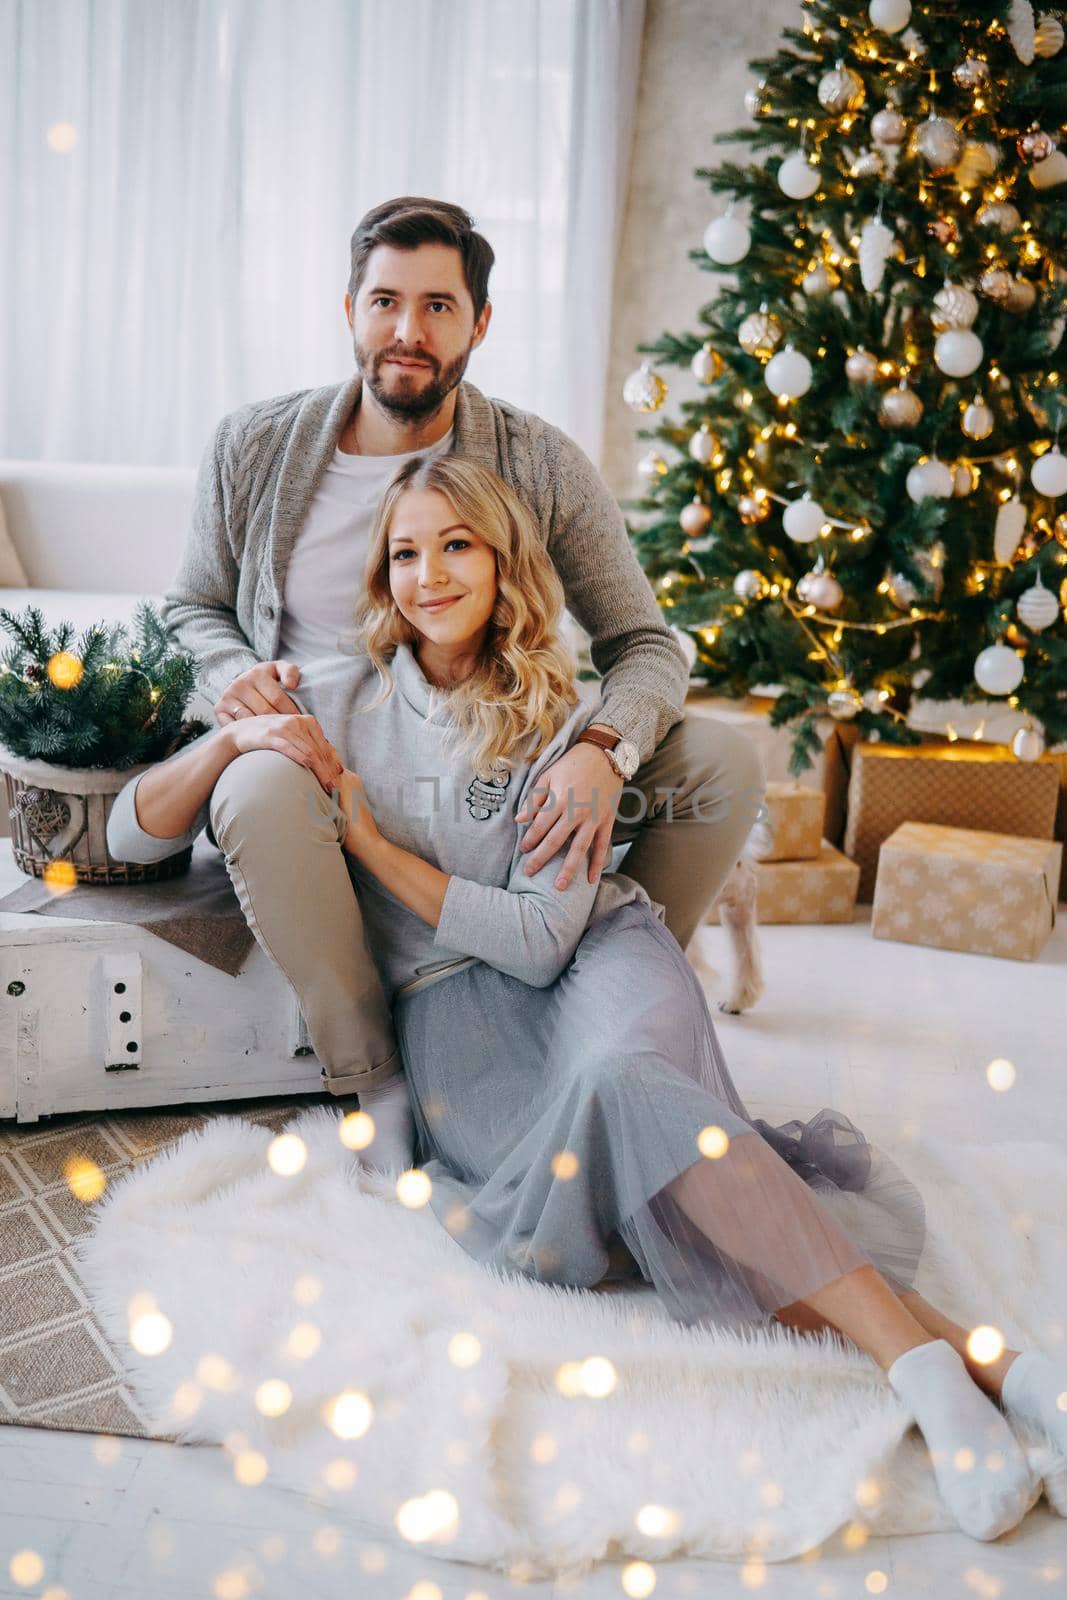 A happy couple in love - a man and a woman. A family in a bright New Year's interior with a Christmas tree.